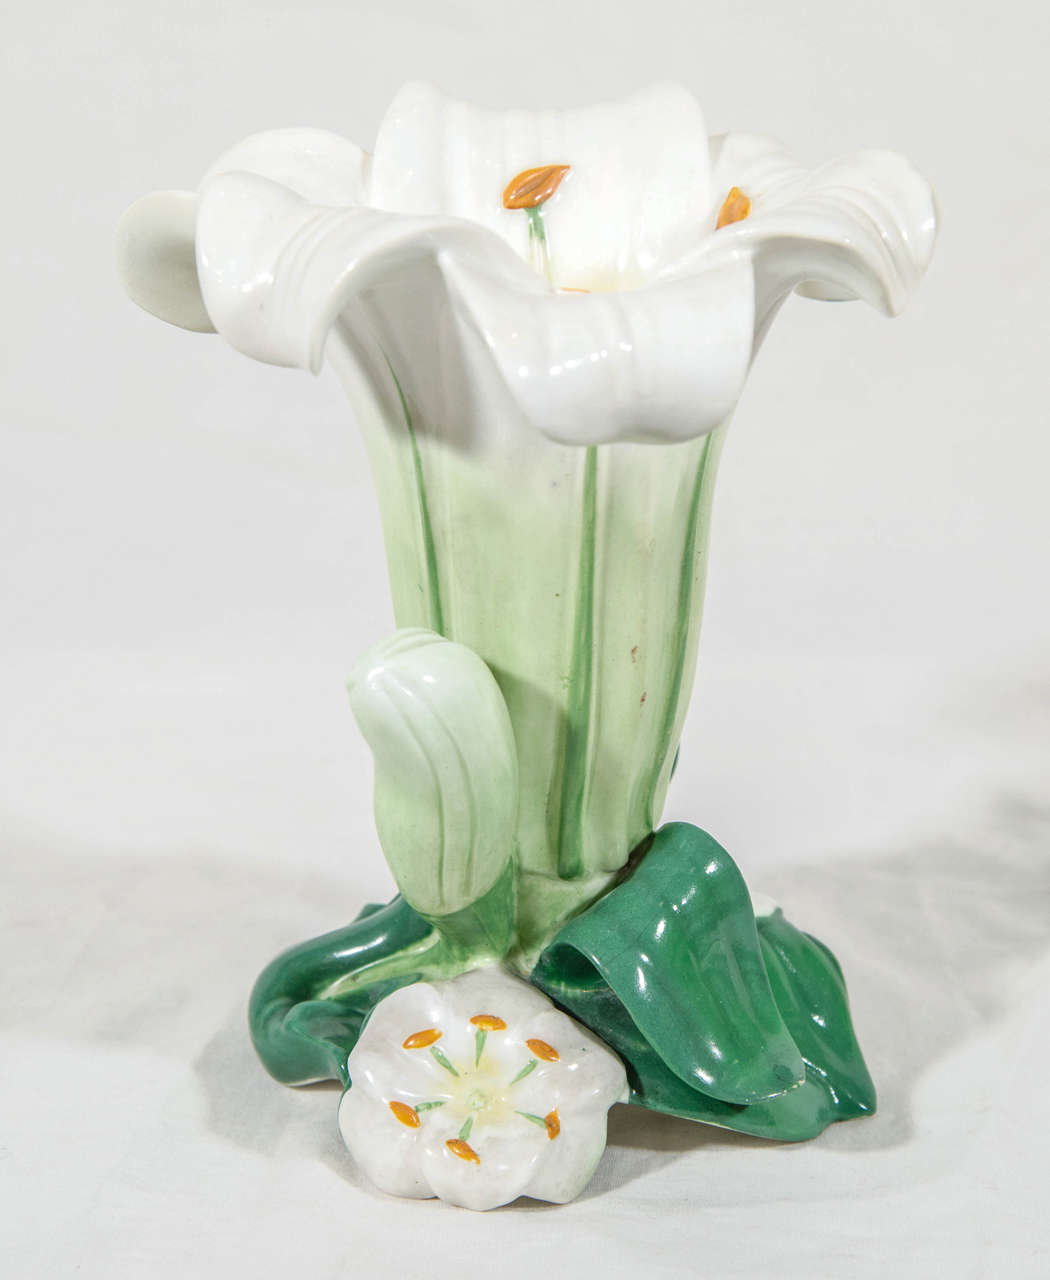 A pair of mid-19th century Minton porcelain vases in the form of lilies. They are lifesize and naturalistically modeled.